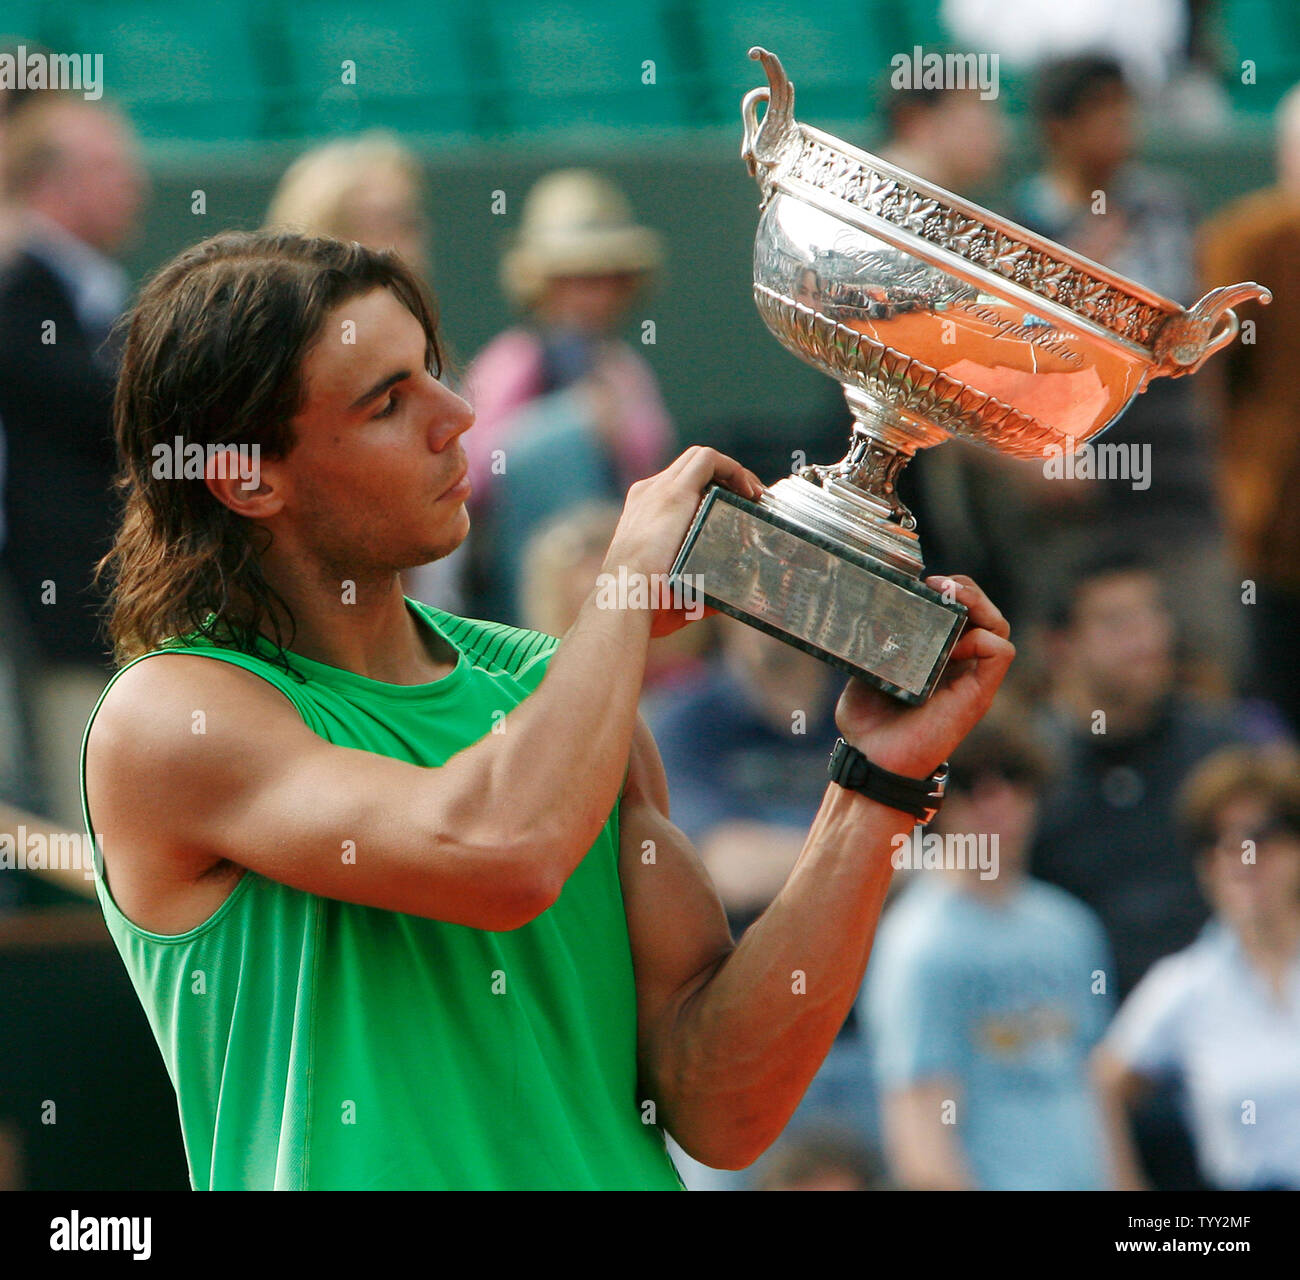 Rafael Nadal of Spain holds the champion's trophy after winning his finals  match with Roger Federer of Switzerland at the French Tennis Open in Paris  on June 8, 2008. The second-seeded Nadal